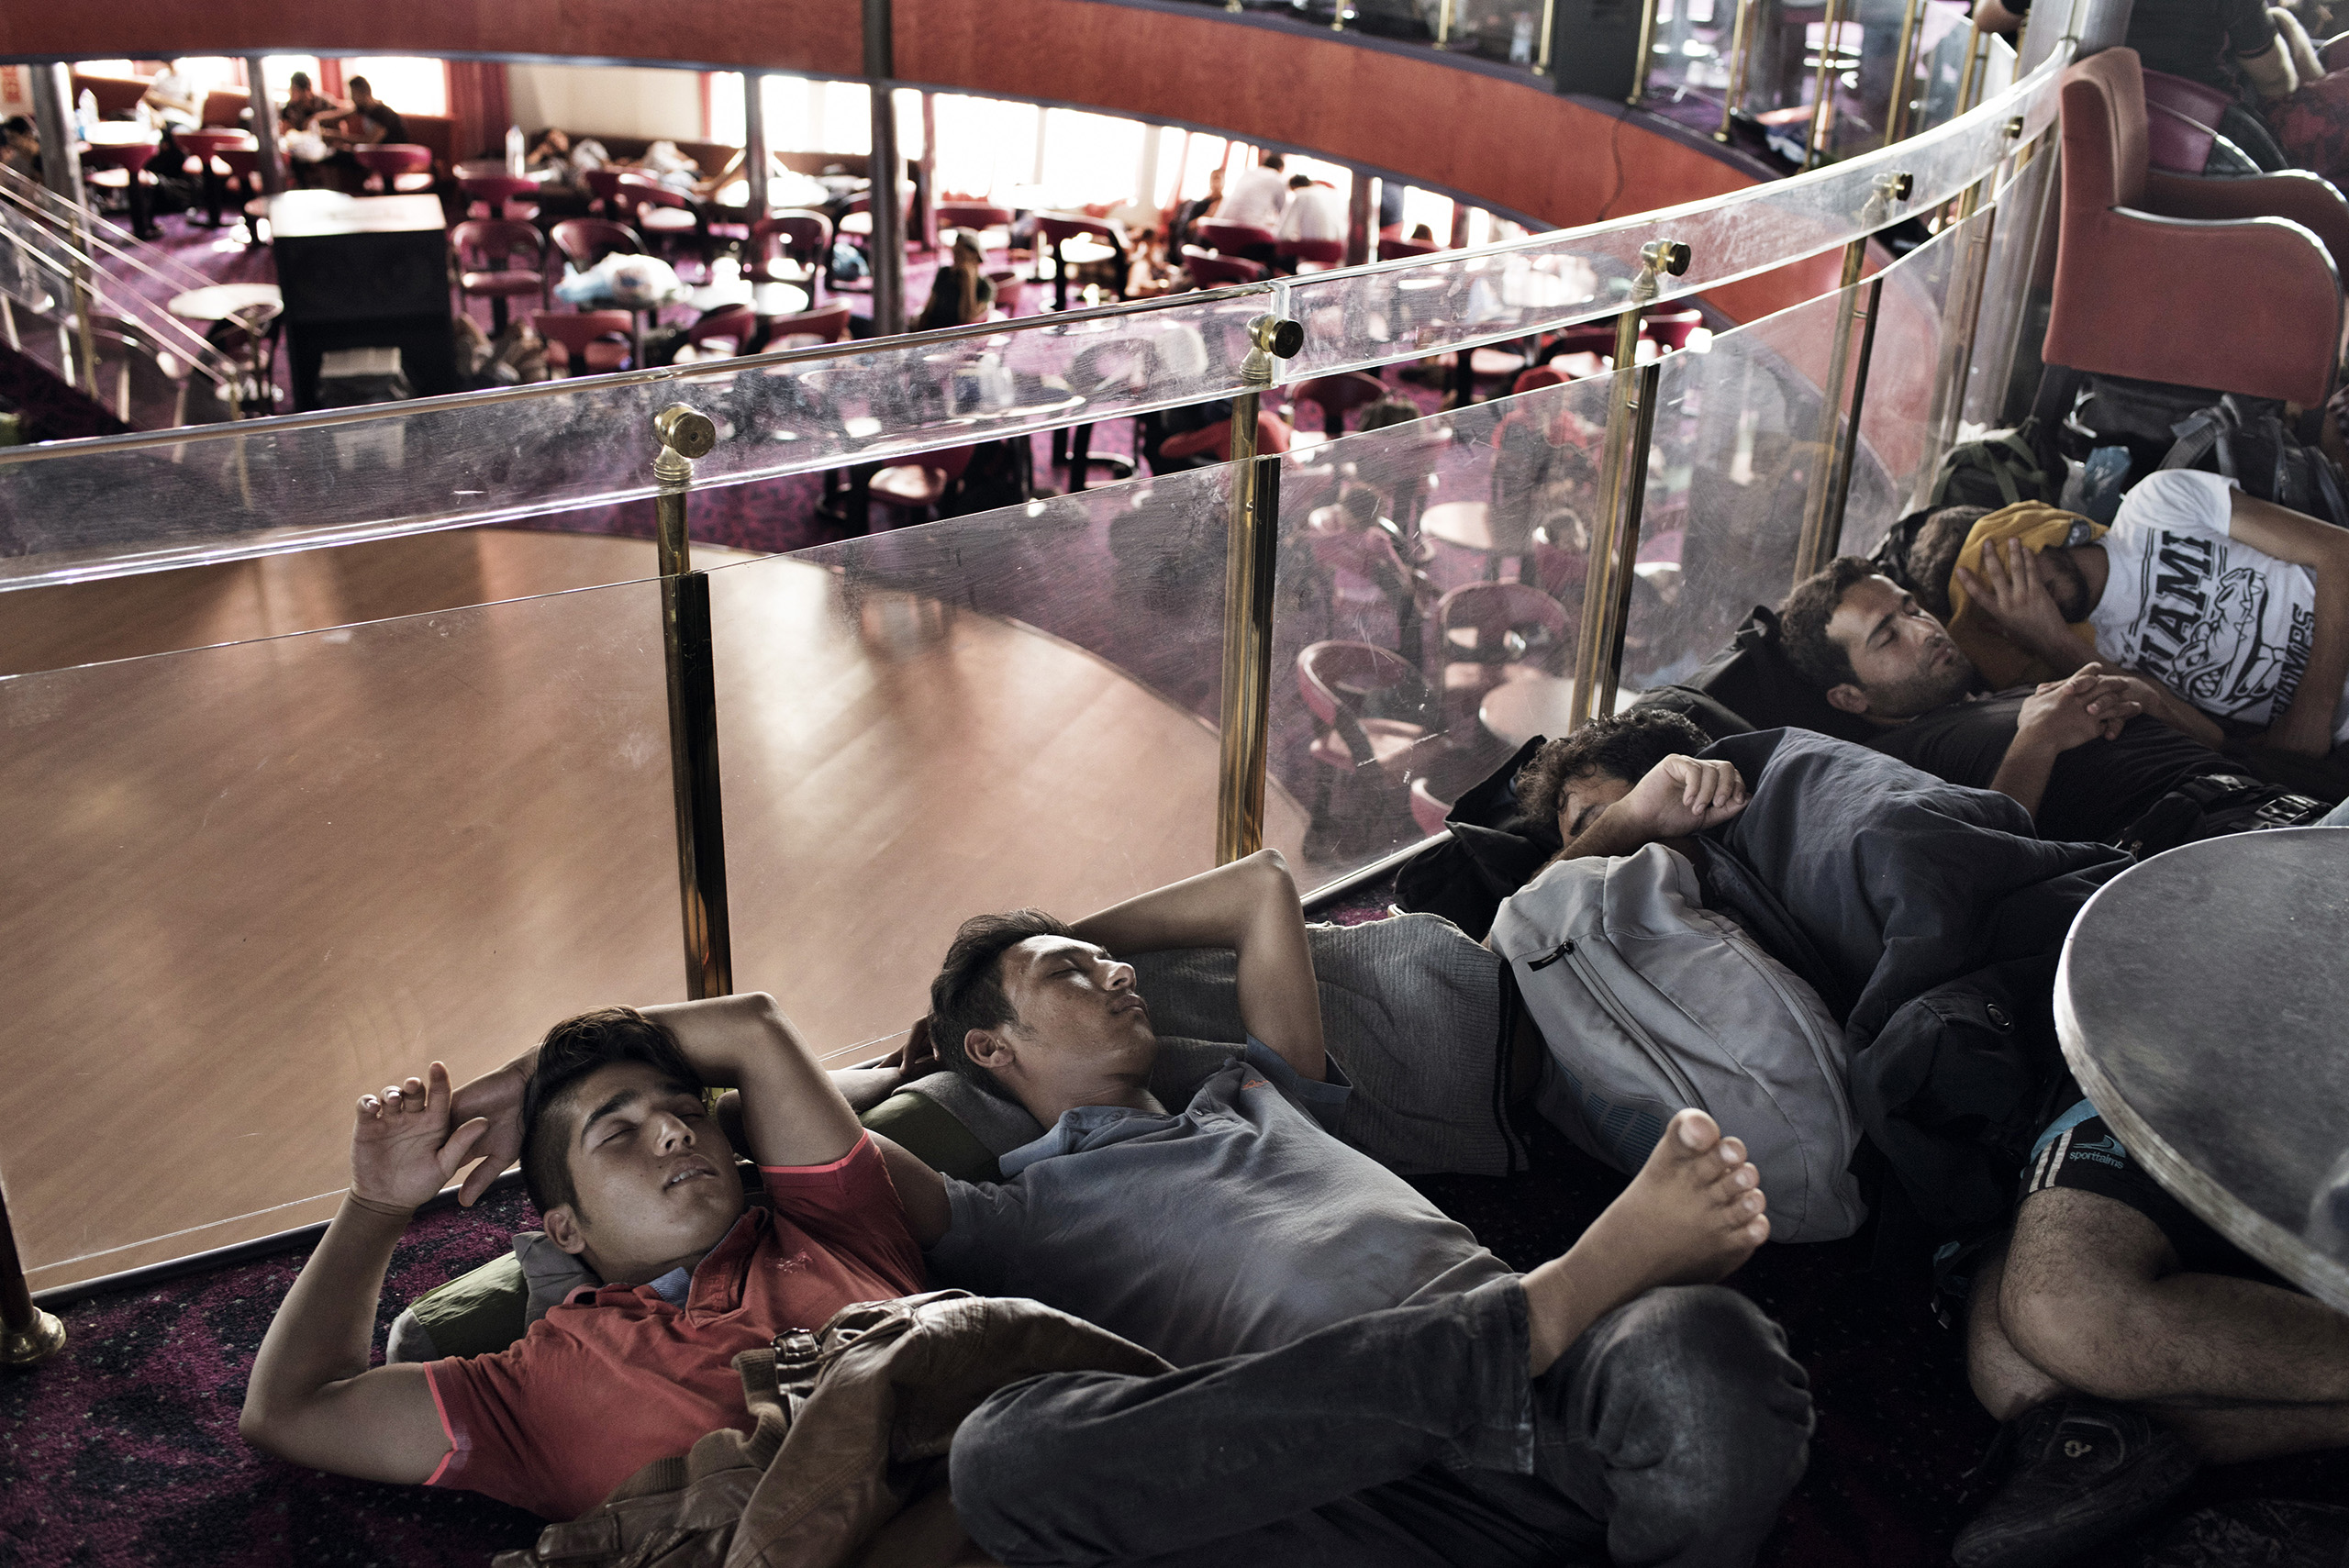 Migrants rest and recharge their phones aboard a cruise ship that the Greek government chartered to transport them to Athens from the Greek island of Lesbos. The regular ferry service traveling this route was unable to cope with the unprecedented influx of migrants going through Greece to Western Europe from various conflict zones across the Muslim world.